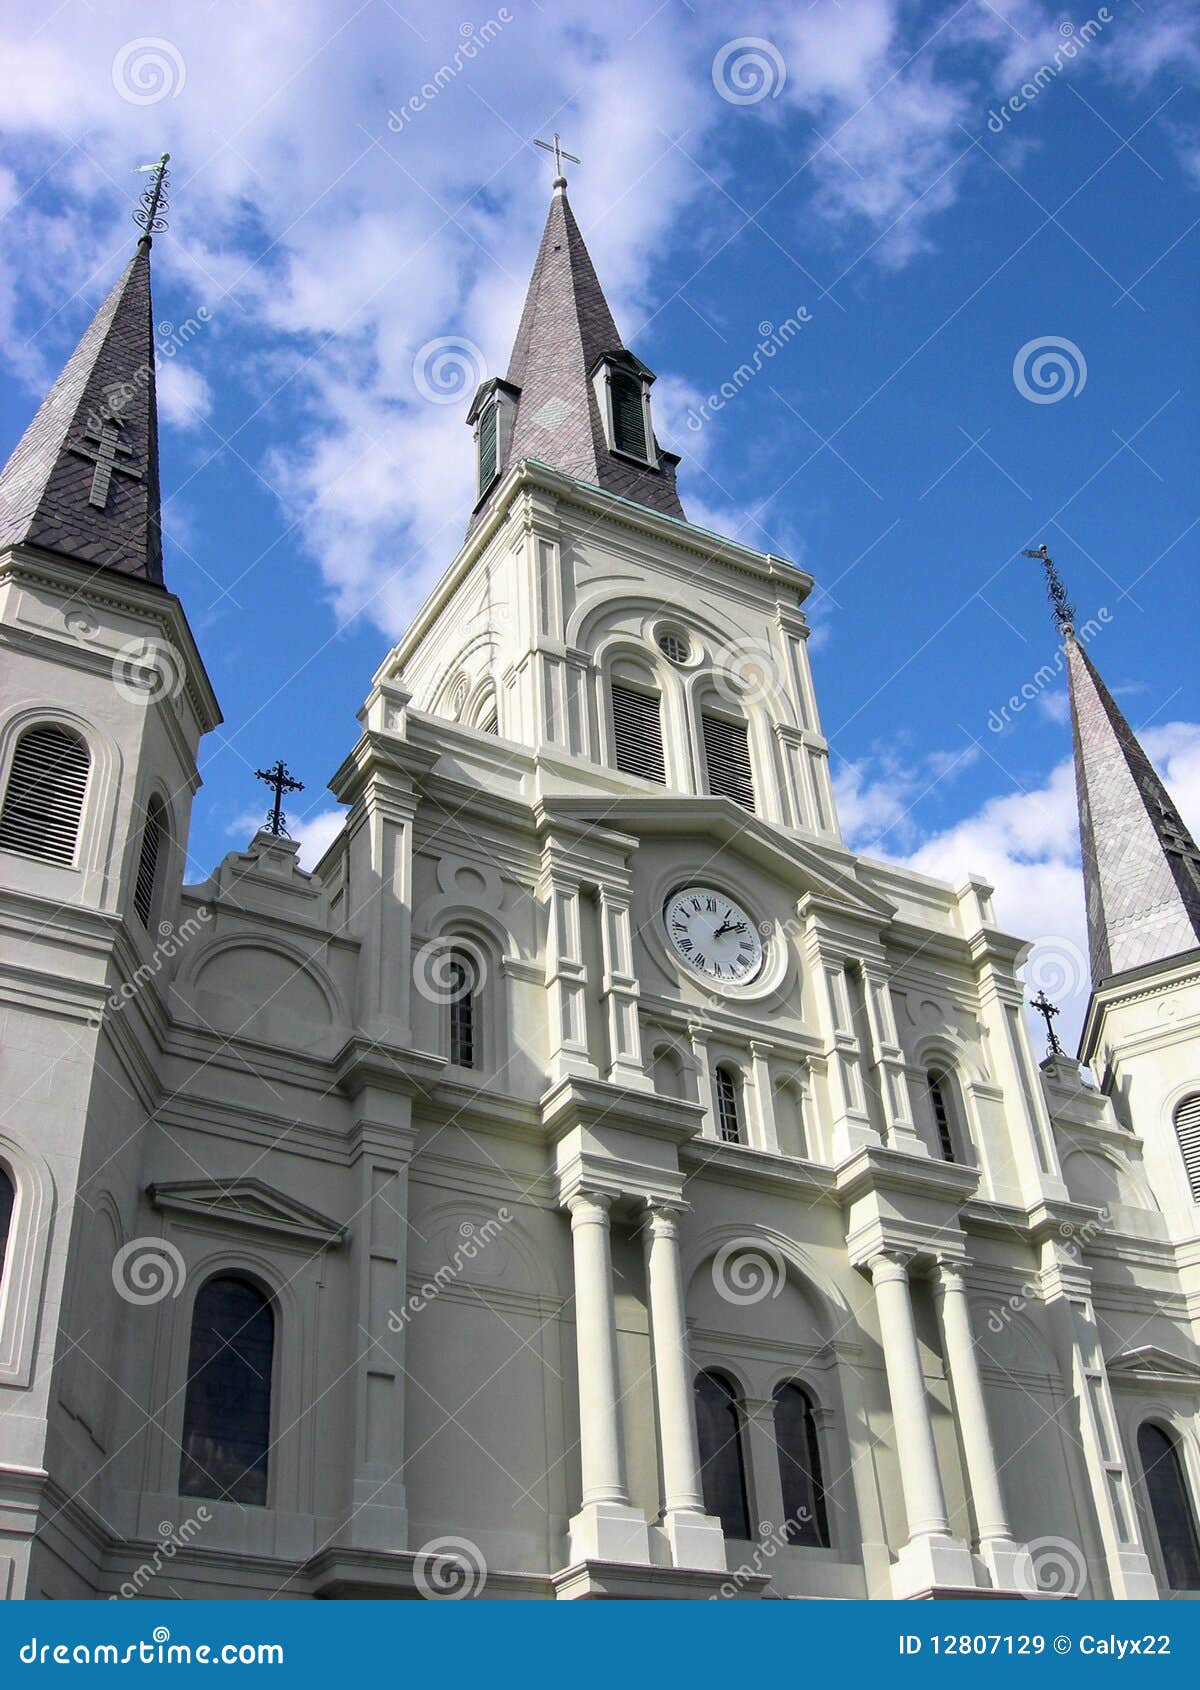 St. Louis Cathedral New Orleans Royalty Free Stock Images - Image: 12807129